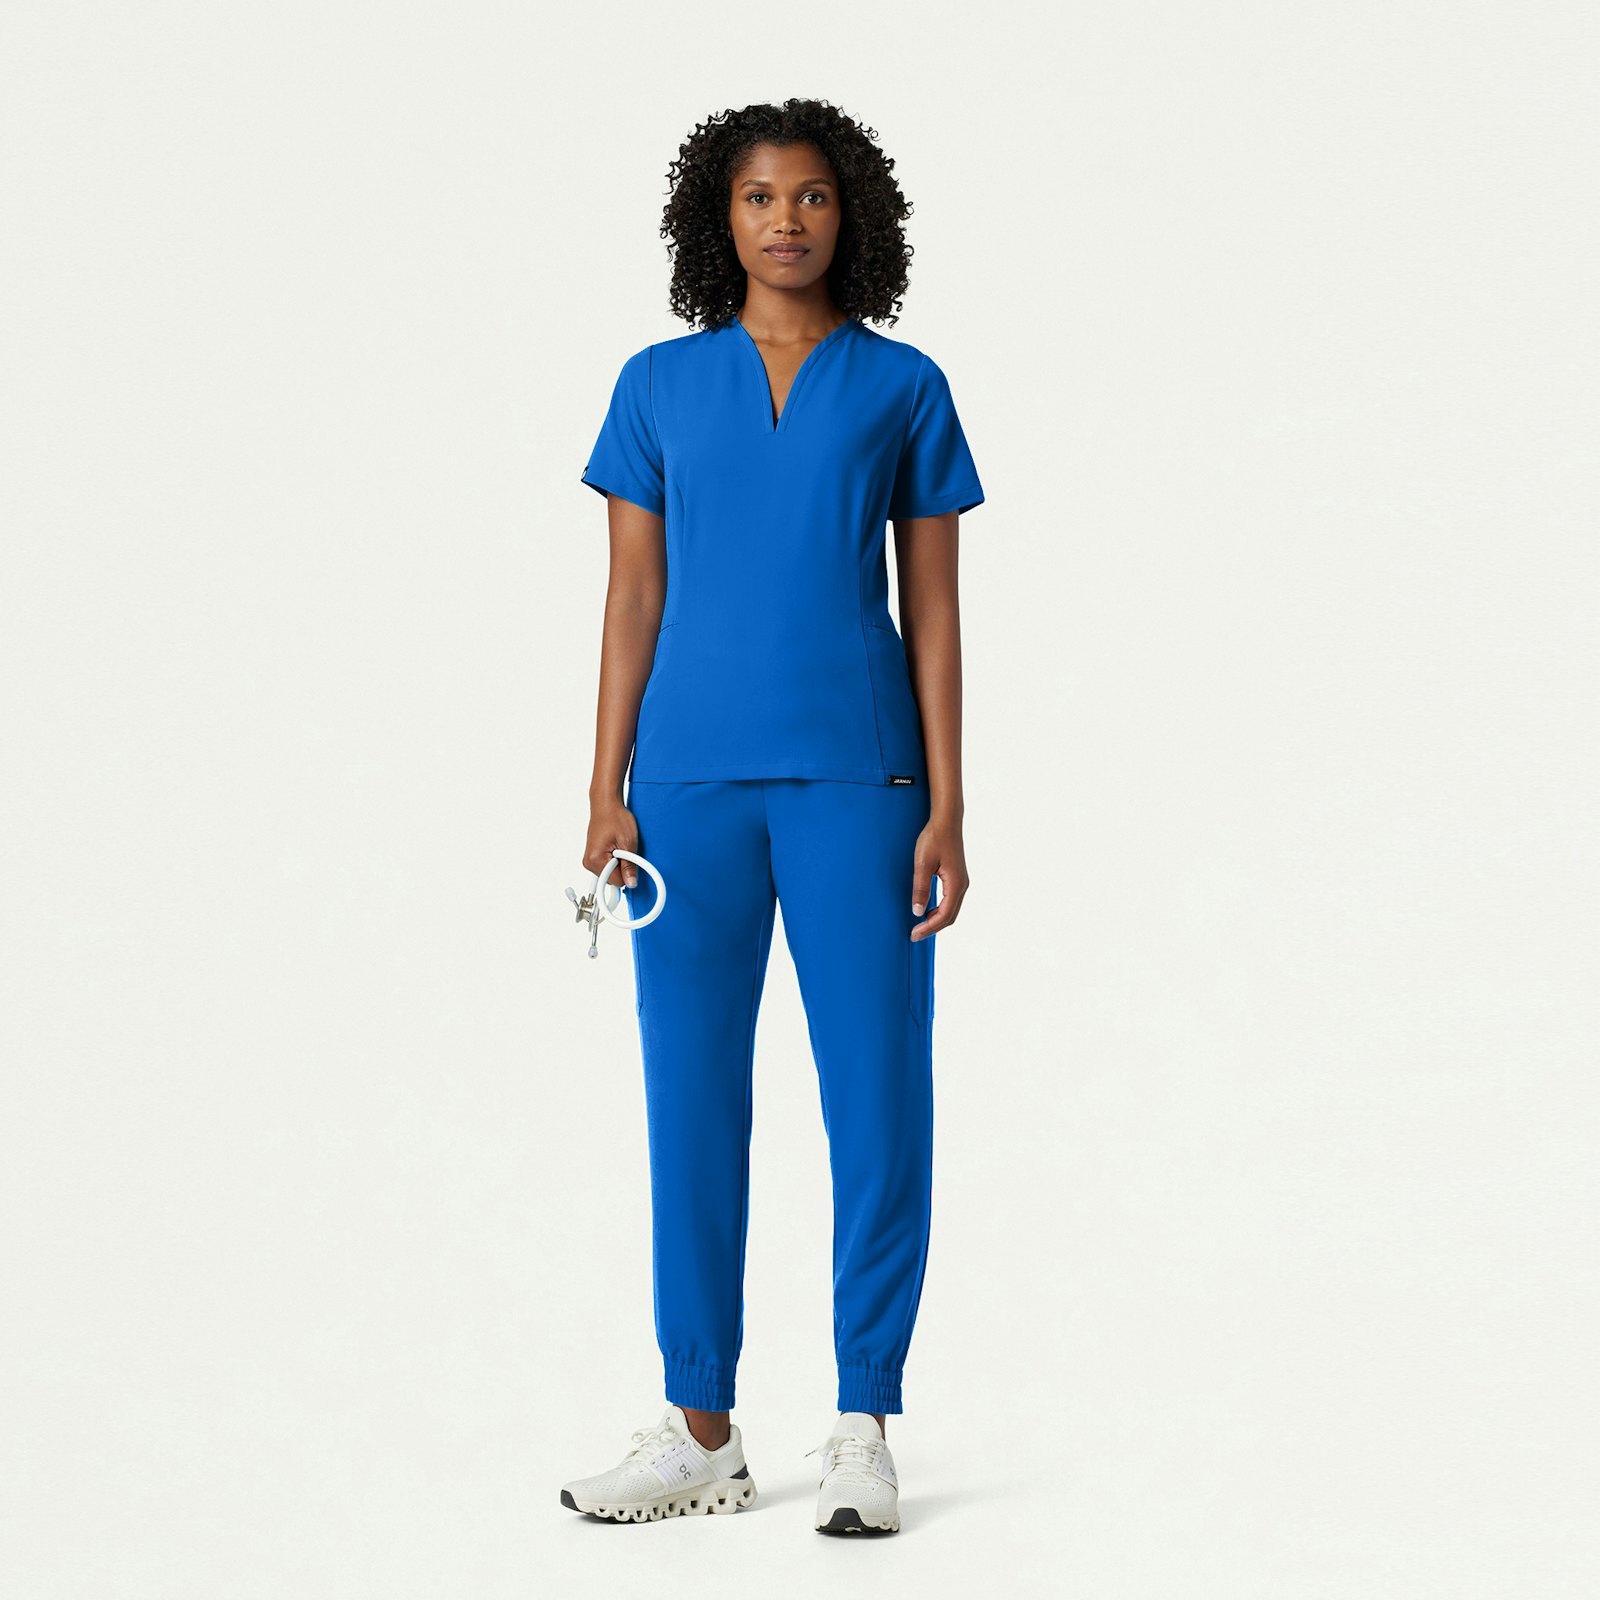 Womens CLASSIC Scrub Suit- Free Embroidery (REGULAR FIT)